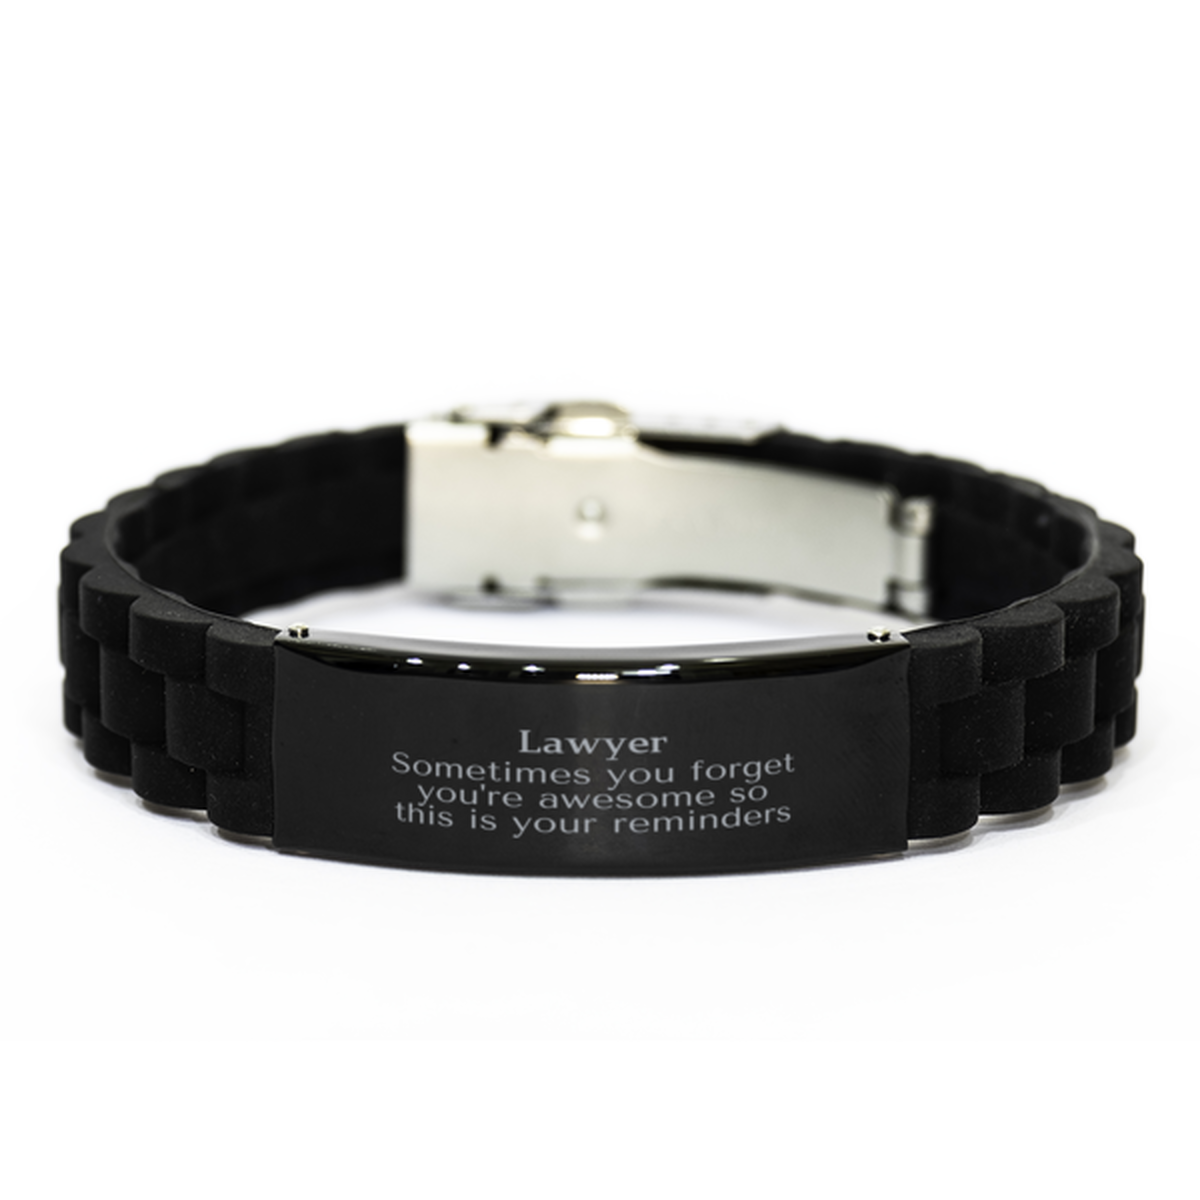 Sentimental Lawyer Black Glidelock Clasp Bracelet, Lawyer Sometimes you forget you're awesome so this is your reminders, Graduation Christmas Birthday Gifts for Lawyer, Men, Women, Coworkers